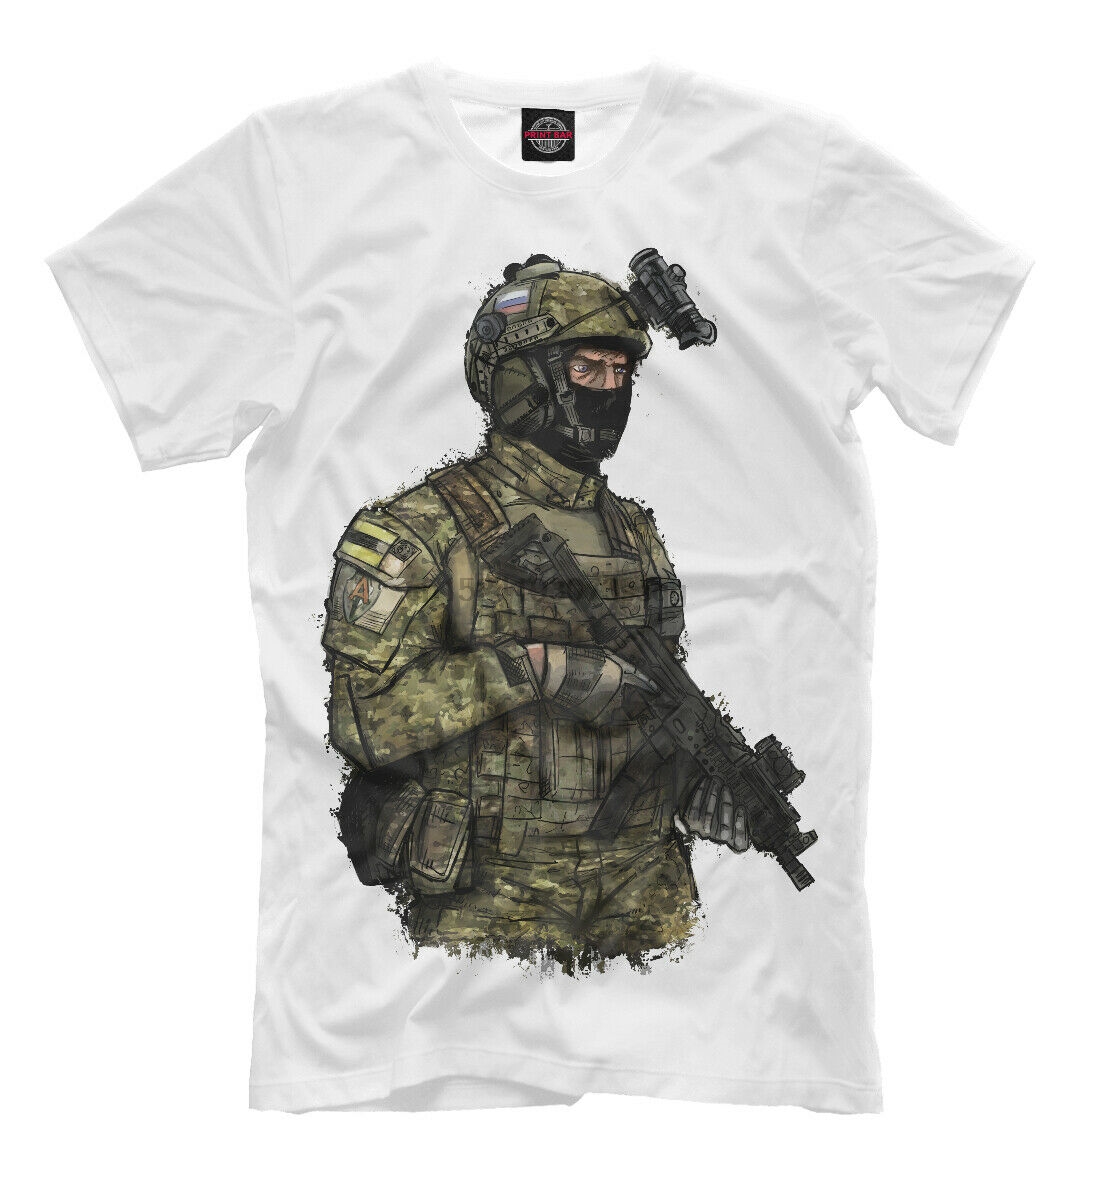 Fighter FSB Federal Security Service of Russia NEW t-shirt Russia Army 473376